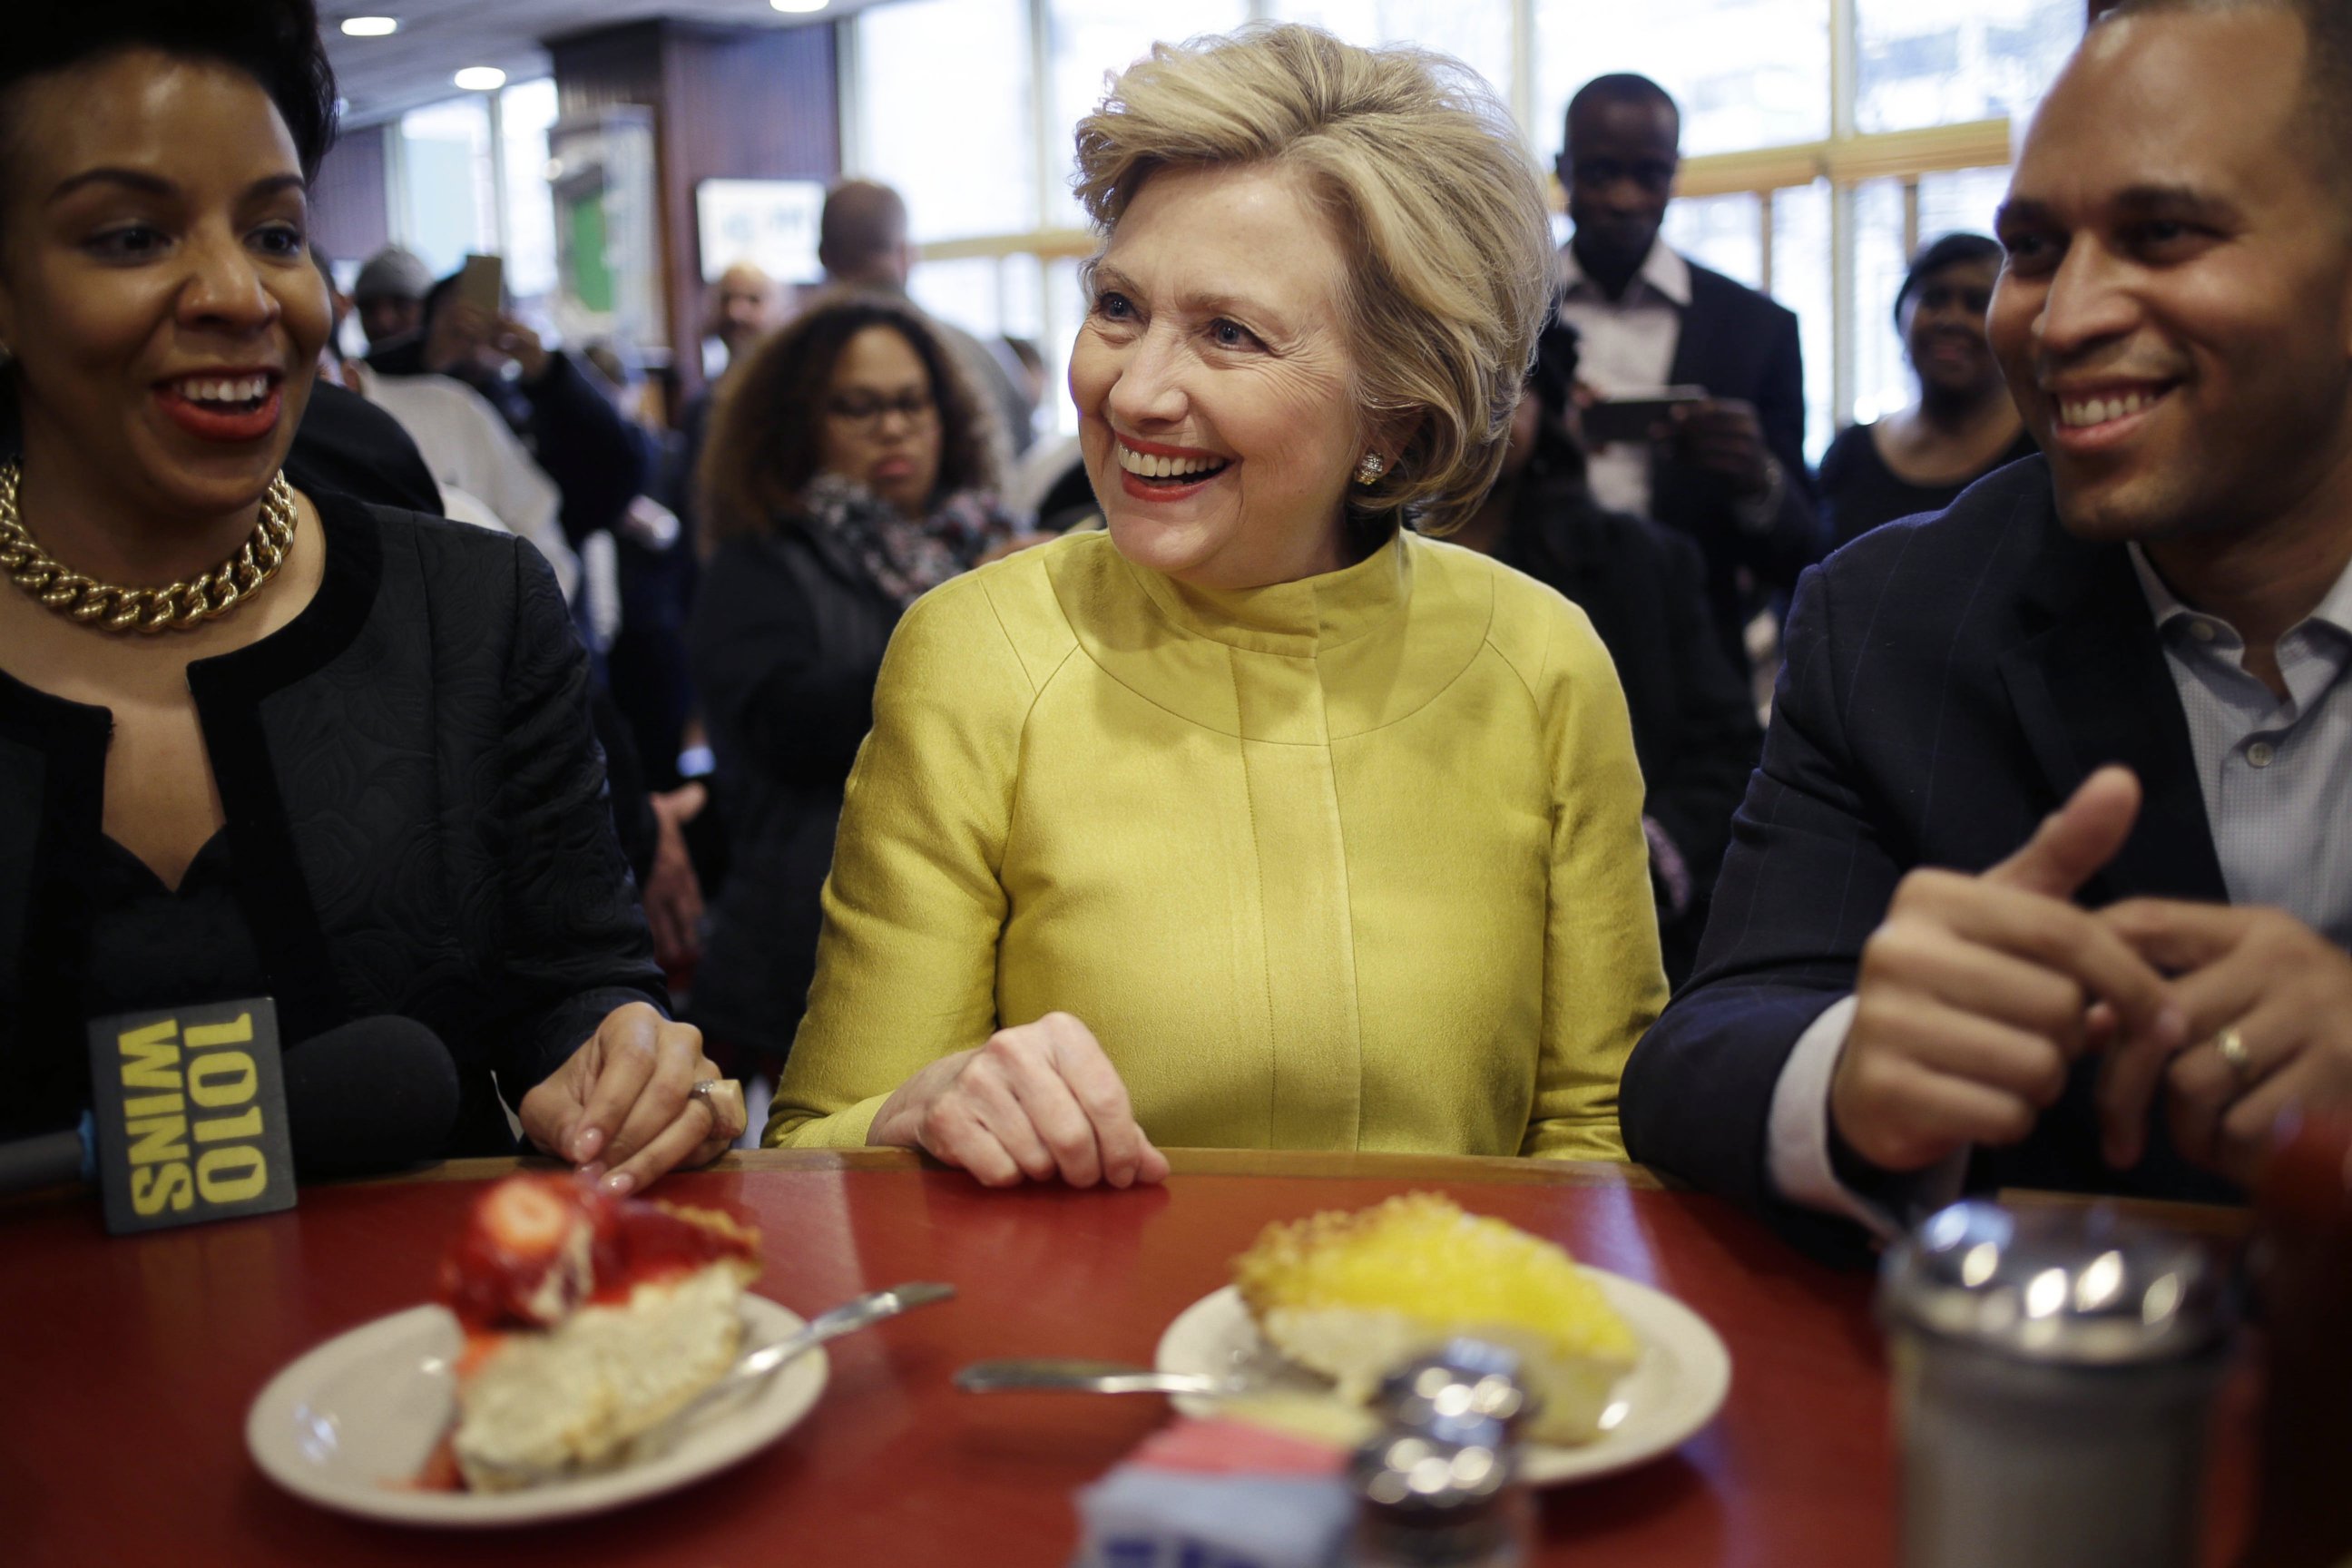 PHOTO: Presidential candidate Hillary Clinton sits at the counter of Junior's restaurant in the Brooklyn borough of New York, April 9, 2016.